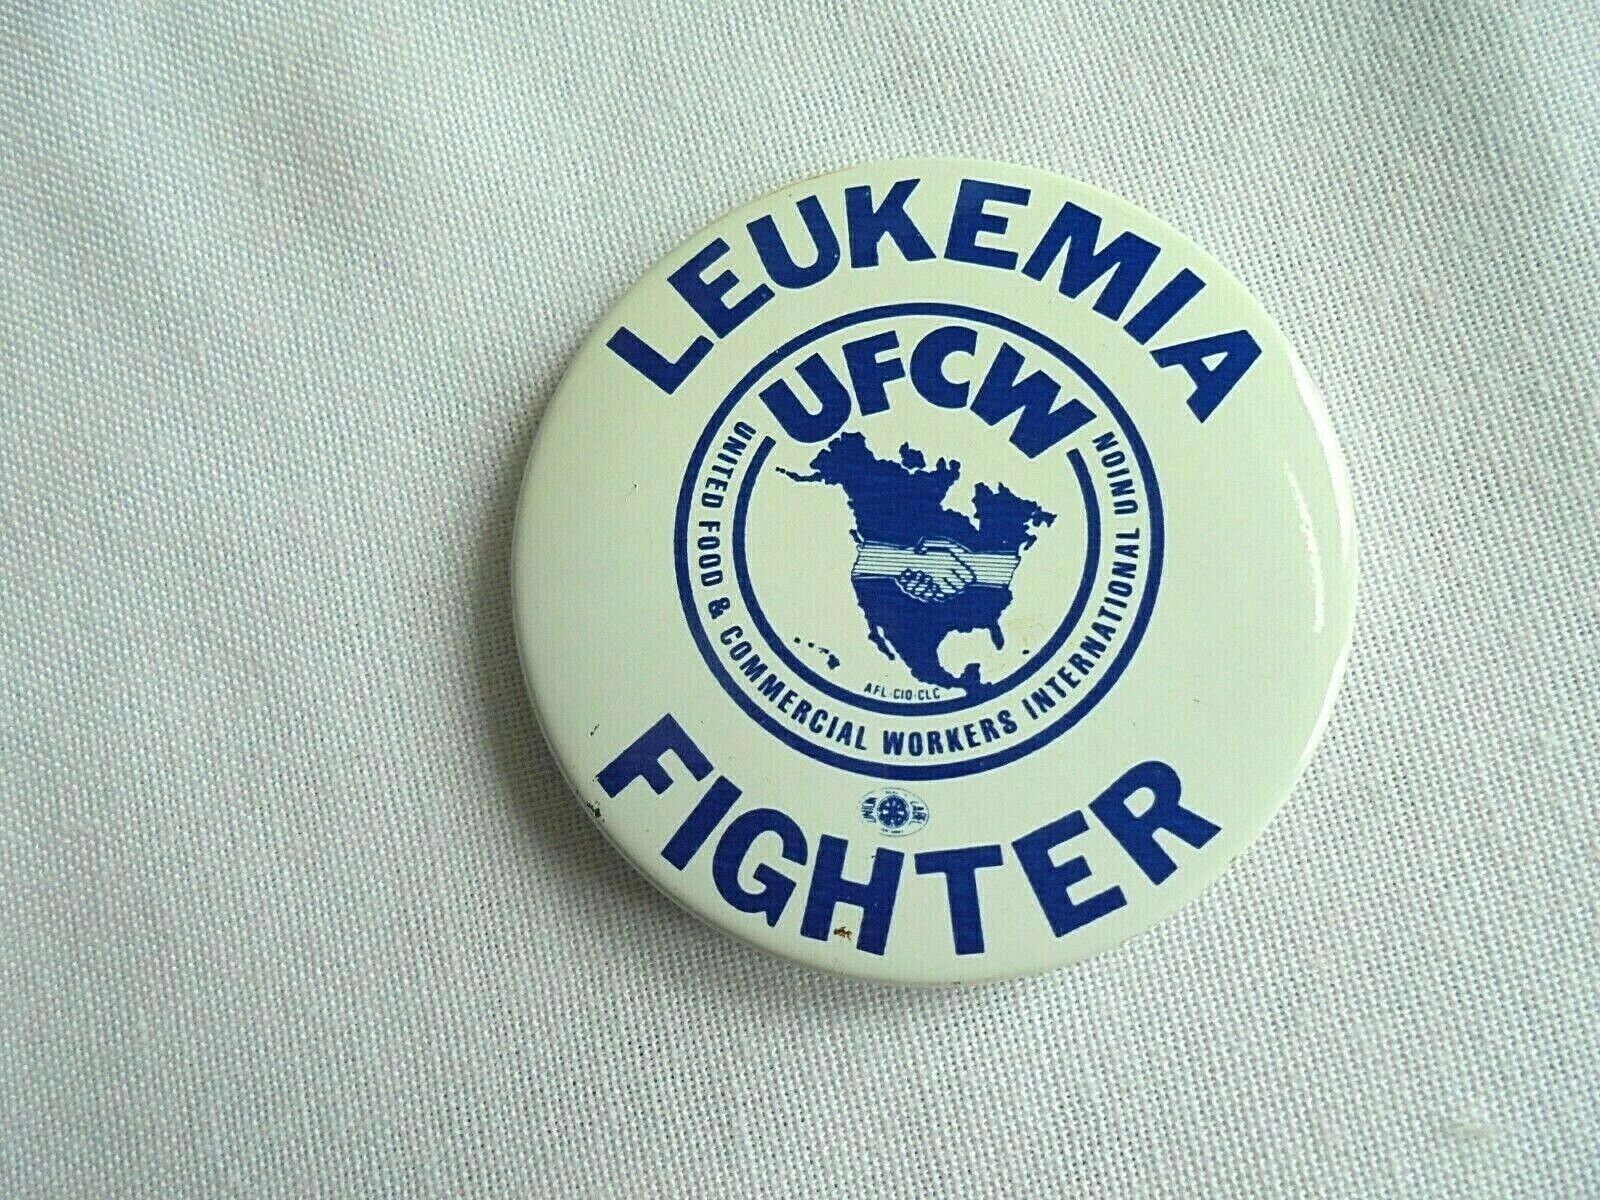 Vintage United Food and Commercial Workers Union UFCW Leukemia Fighter Pinback